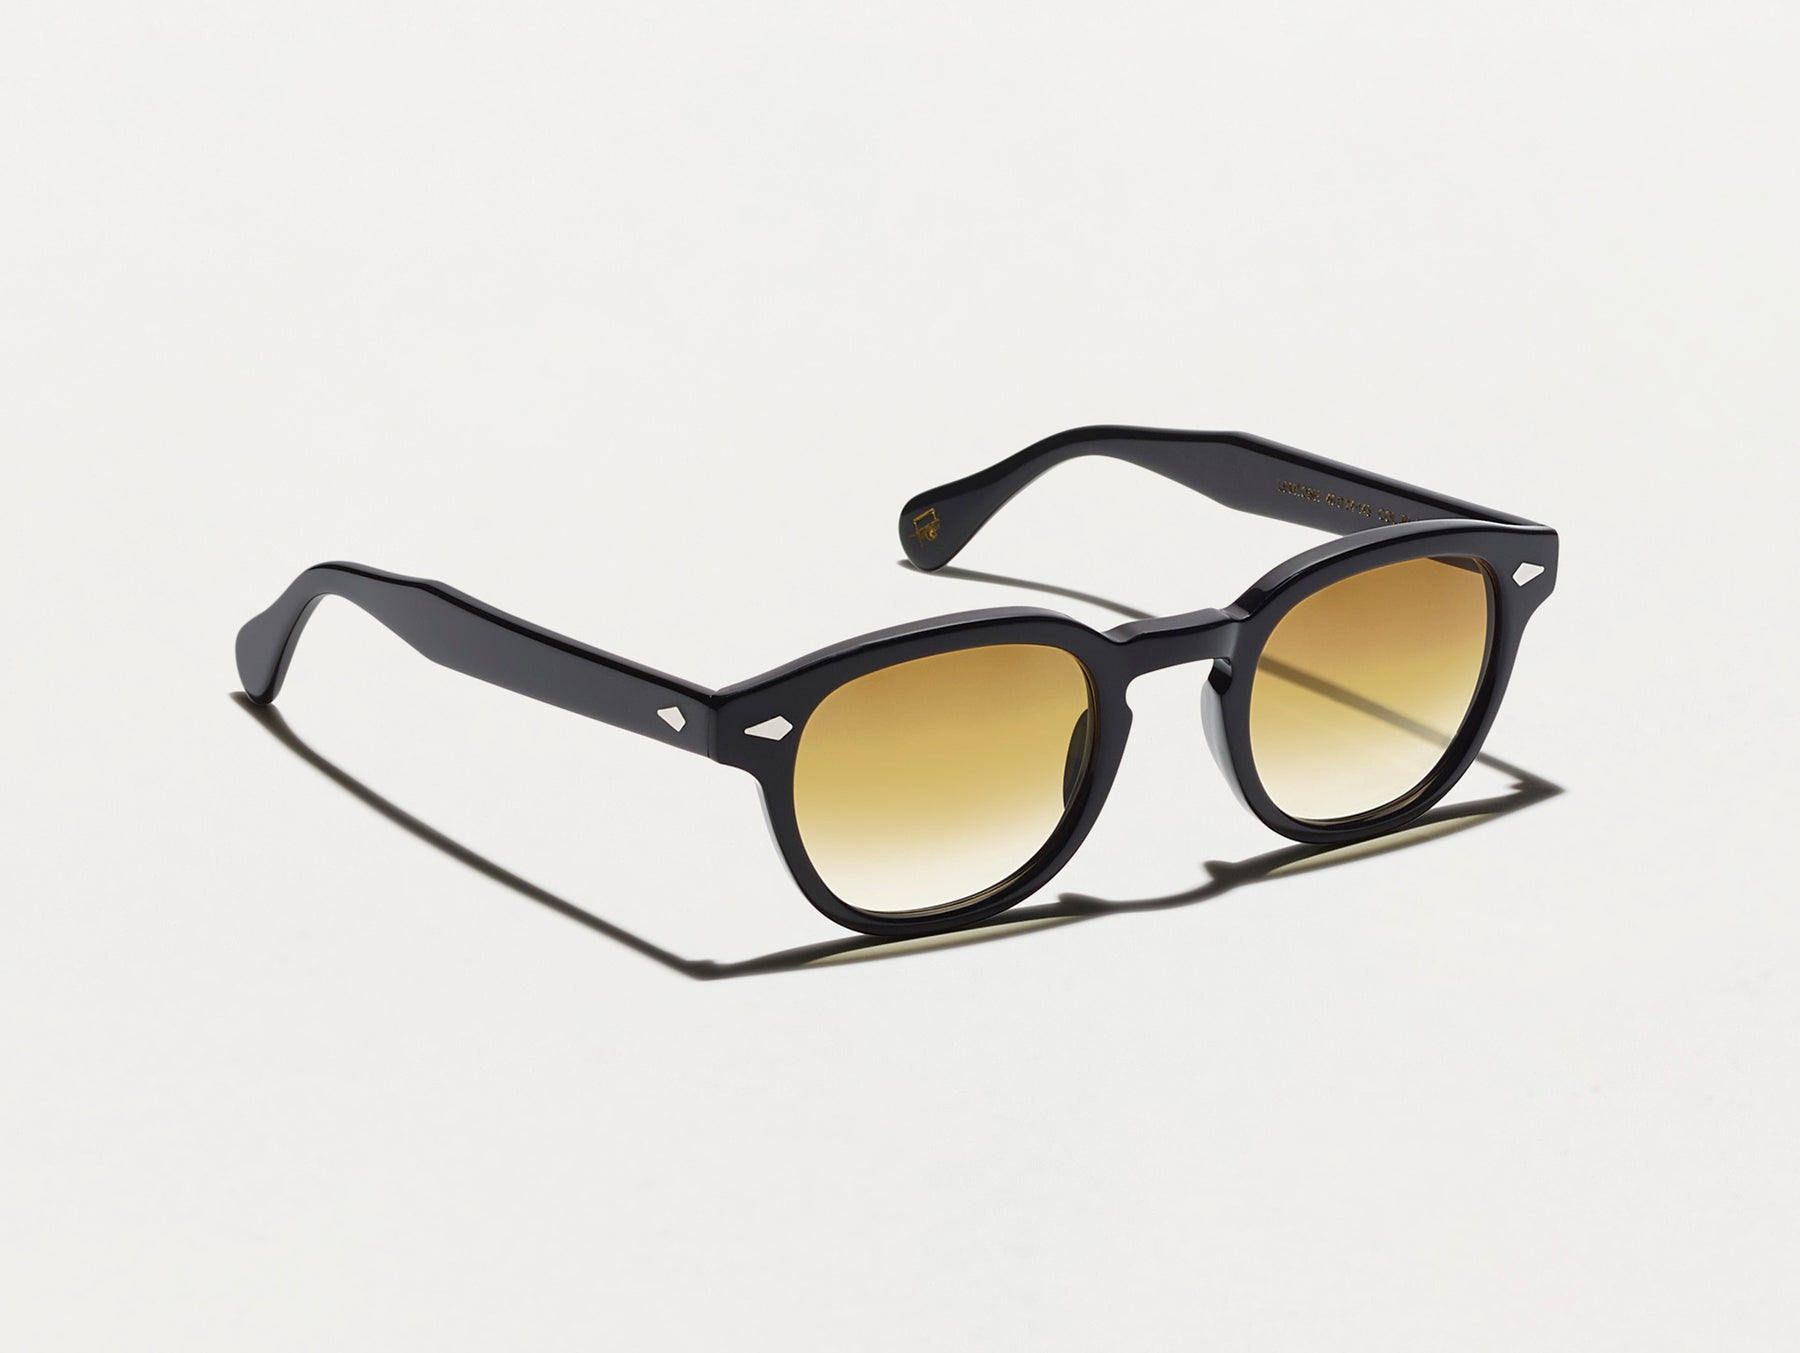 The LEMTOSH Black with Chestnut Fade Tinted Lenses